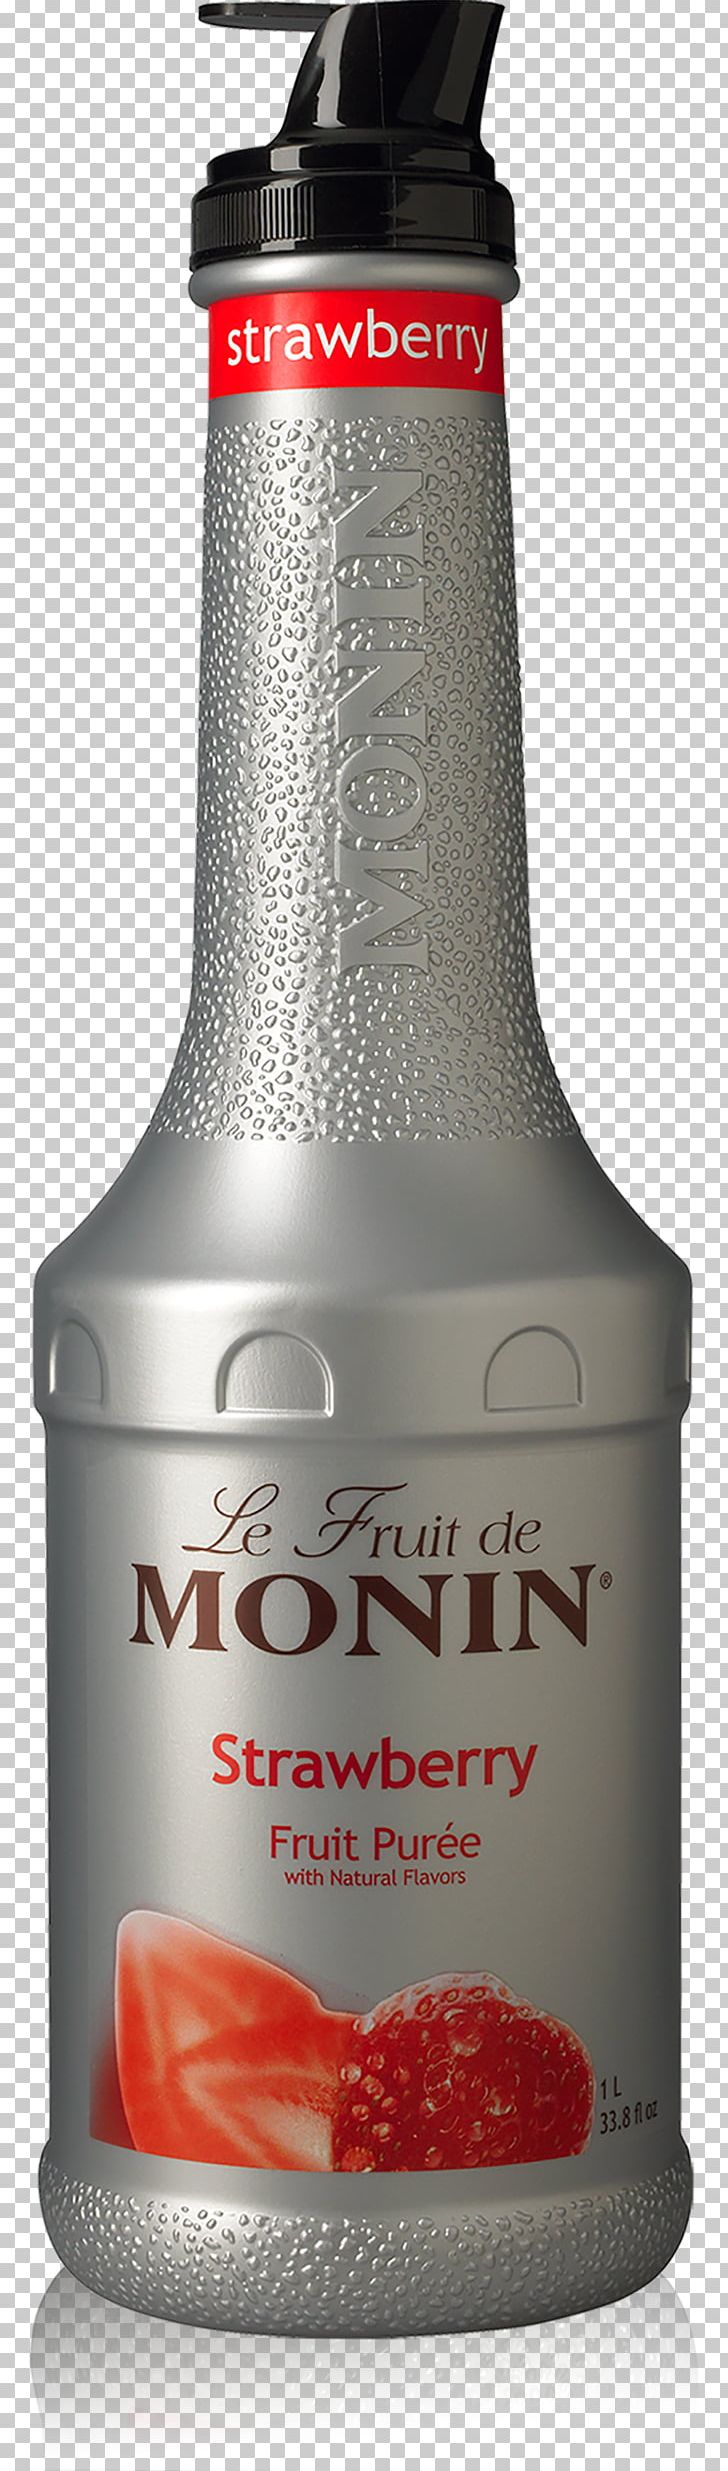 Iced Tea Cocktail Purée Strawberry GEORGES MONIN SAS PNG, Clipart, Bottle, Cocktail, Coffee, Dairy Products, Drink Free PNG Download